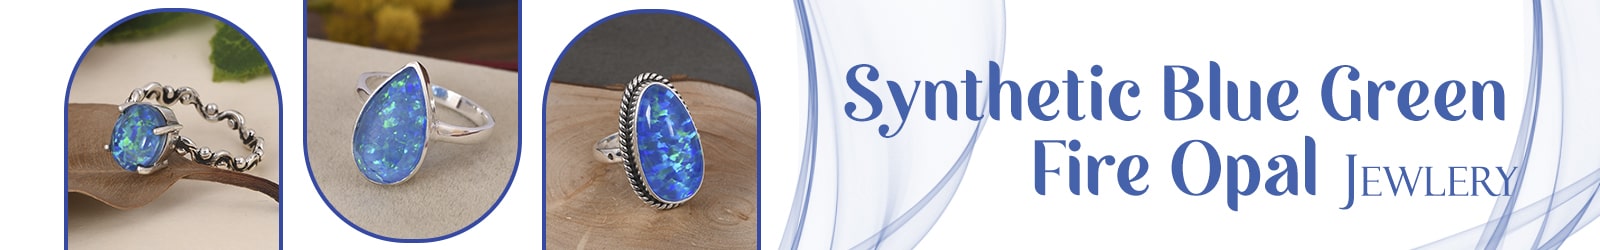 Silver Synthetic Blue Green Fire Opal Jewelry Wholesale Supplier